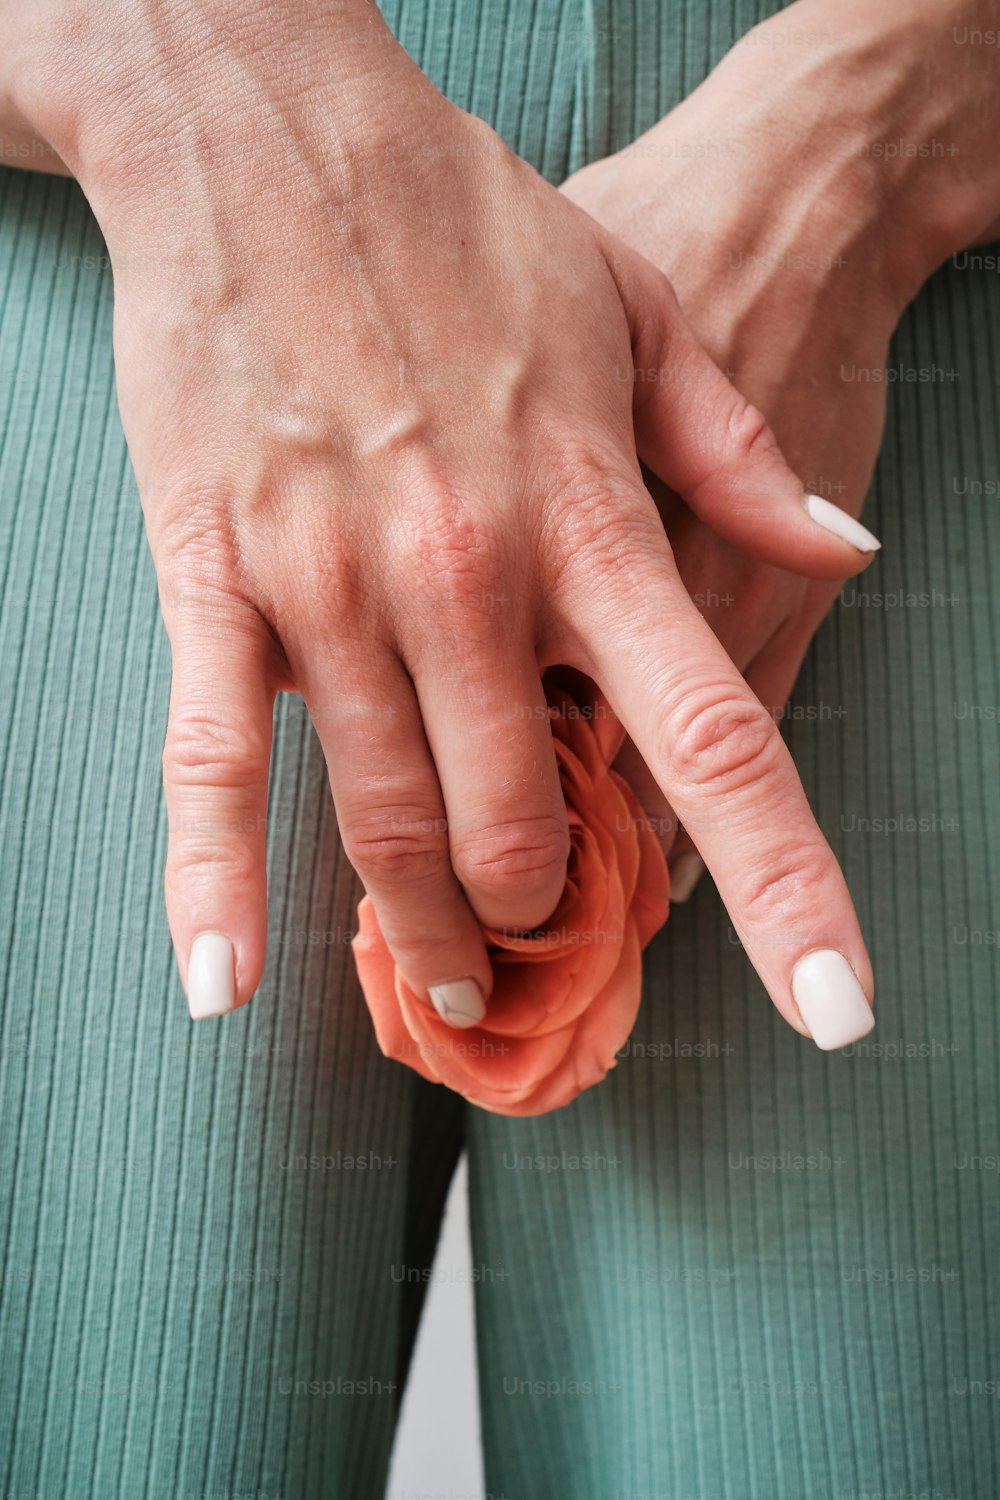 a close up of a person's hands holding a flower